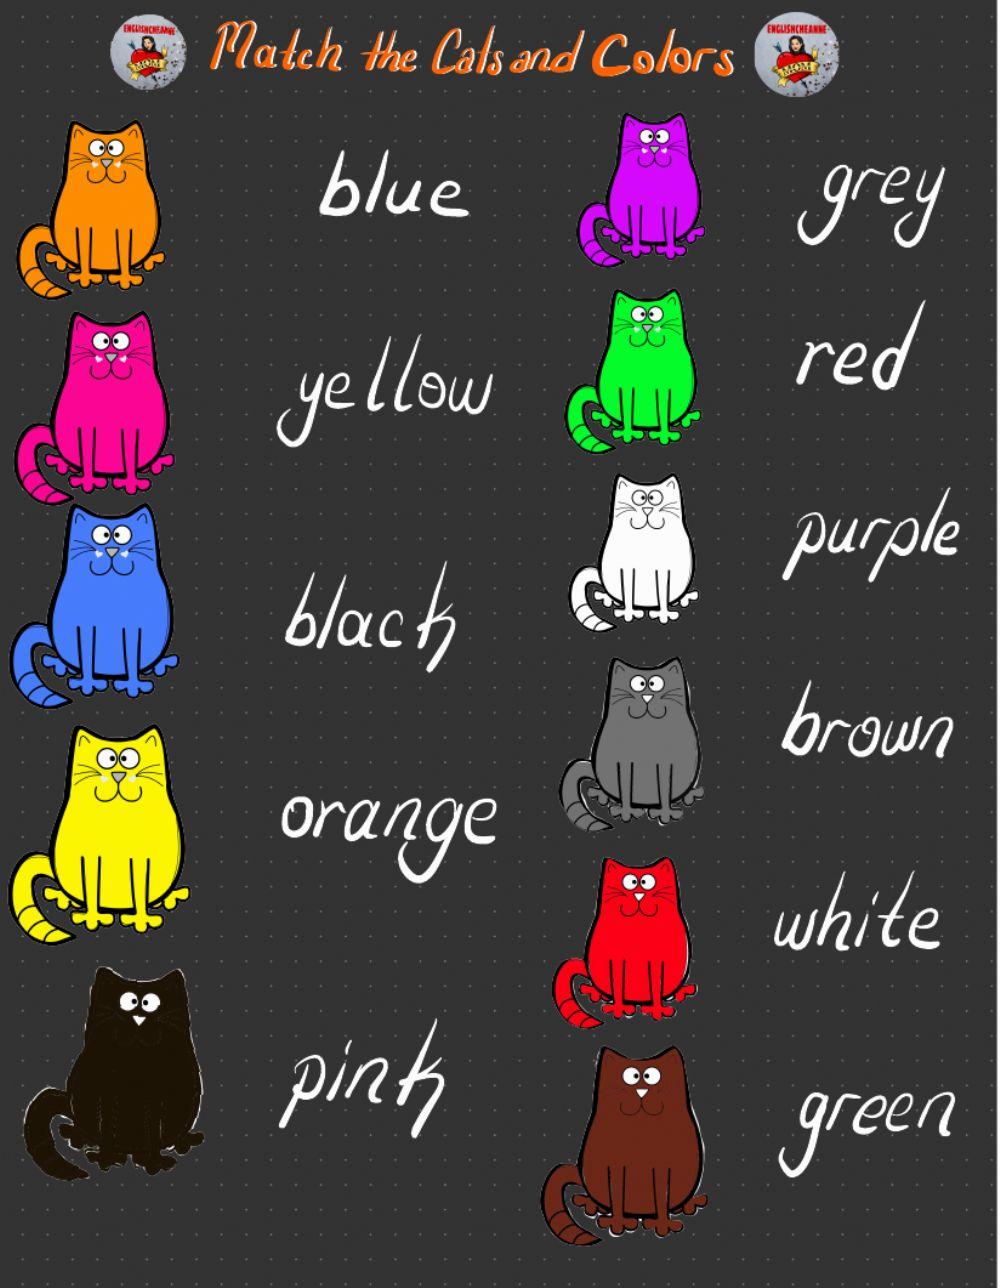 Match the Cats and Colors